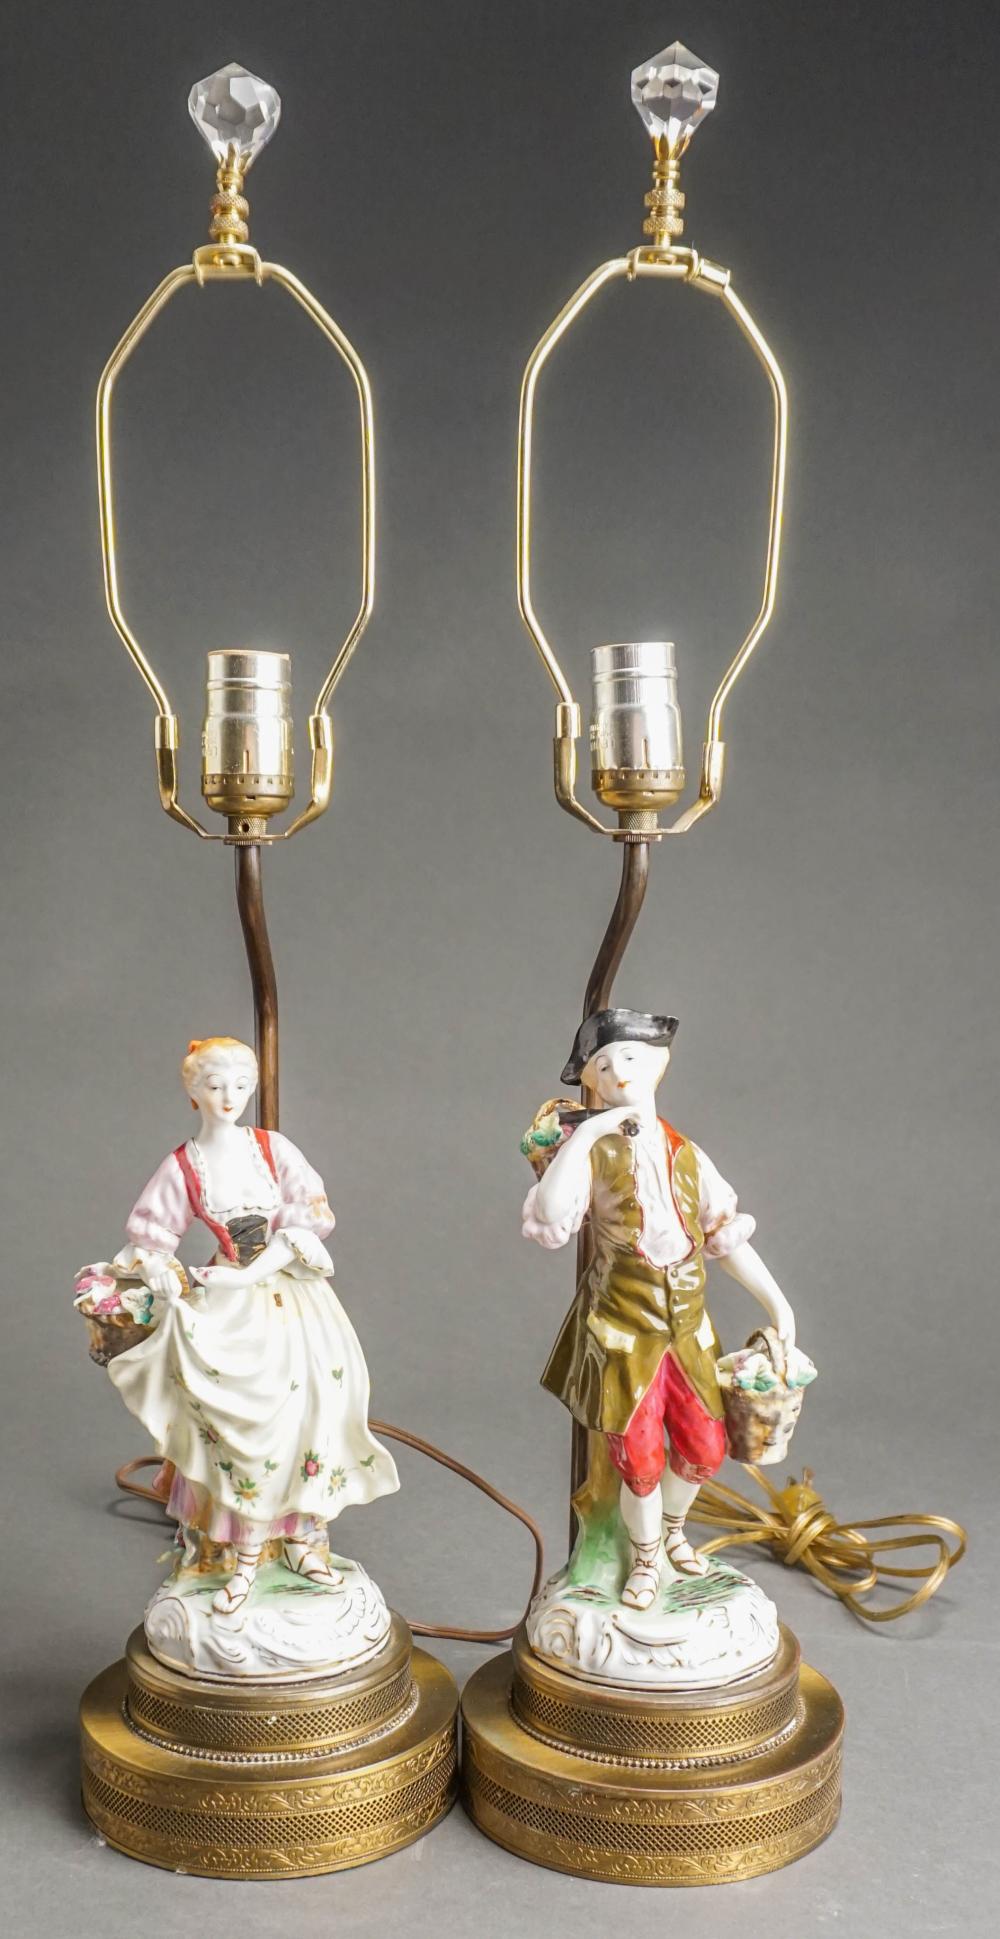 PAIR OF PORCELAIN FIGURINES MOUNTED